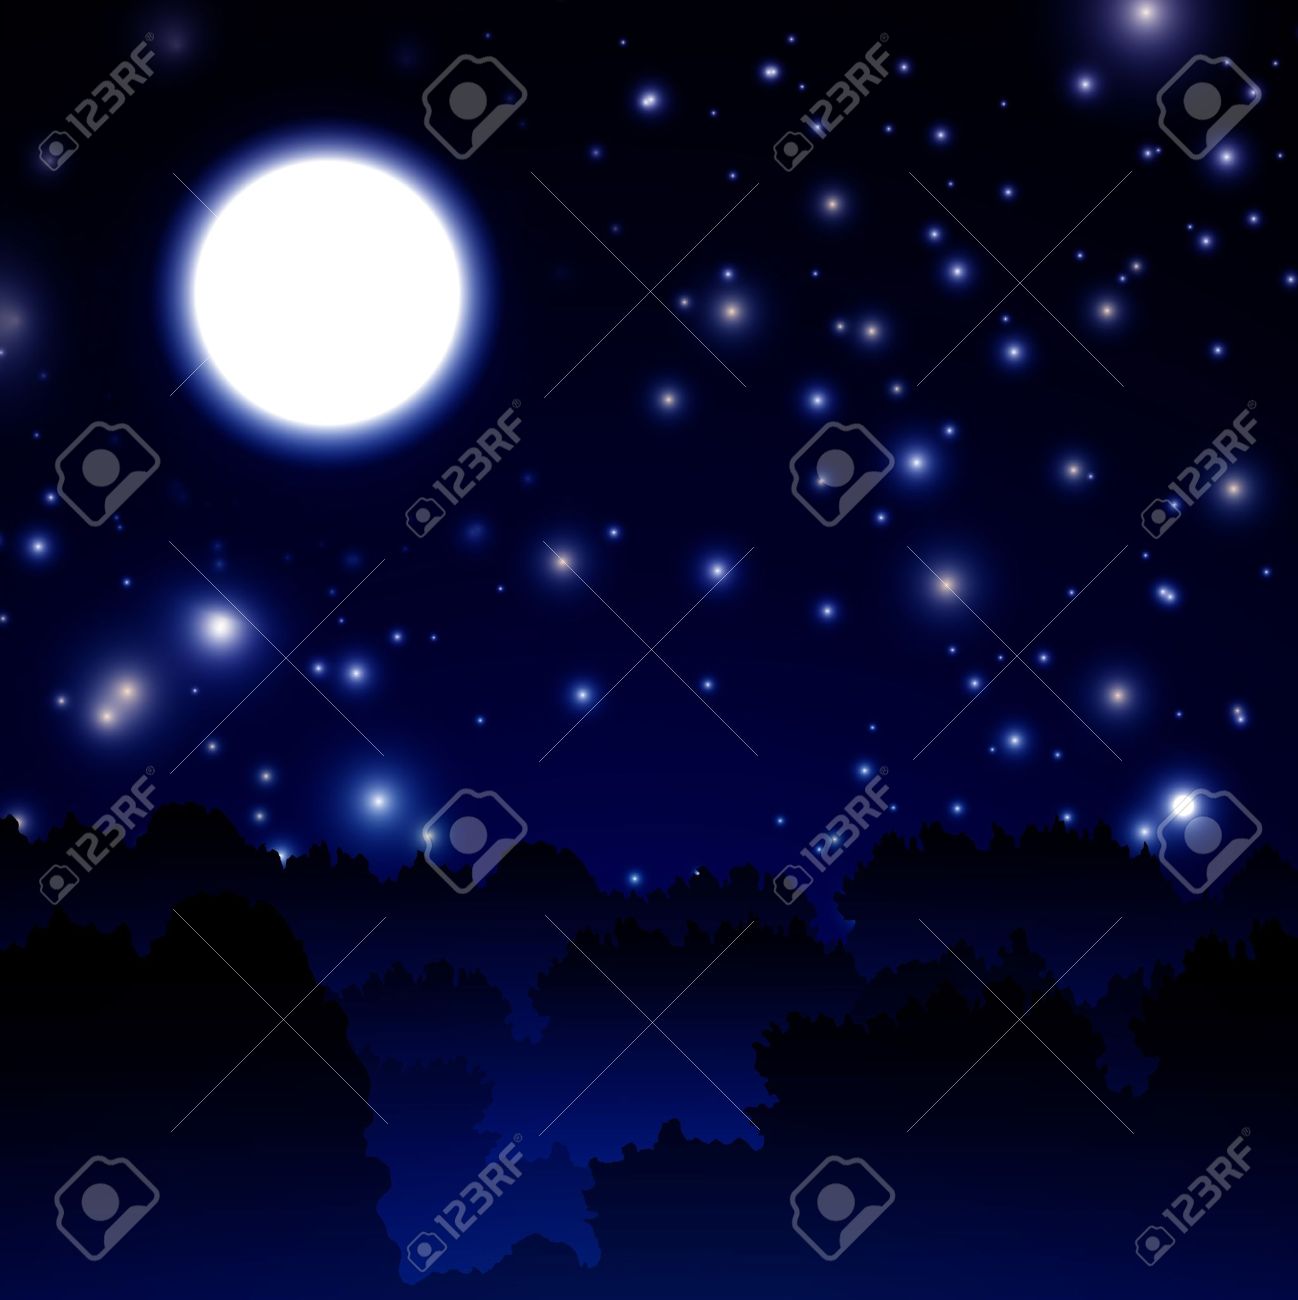 Moonlight clipart #4, Download drawings